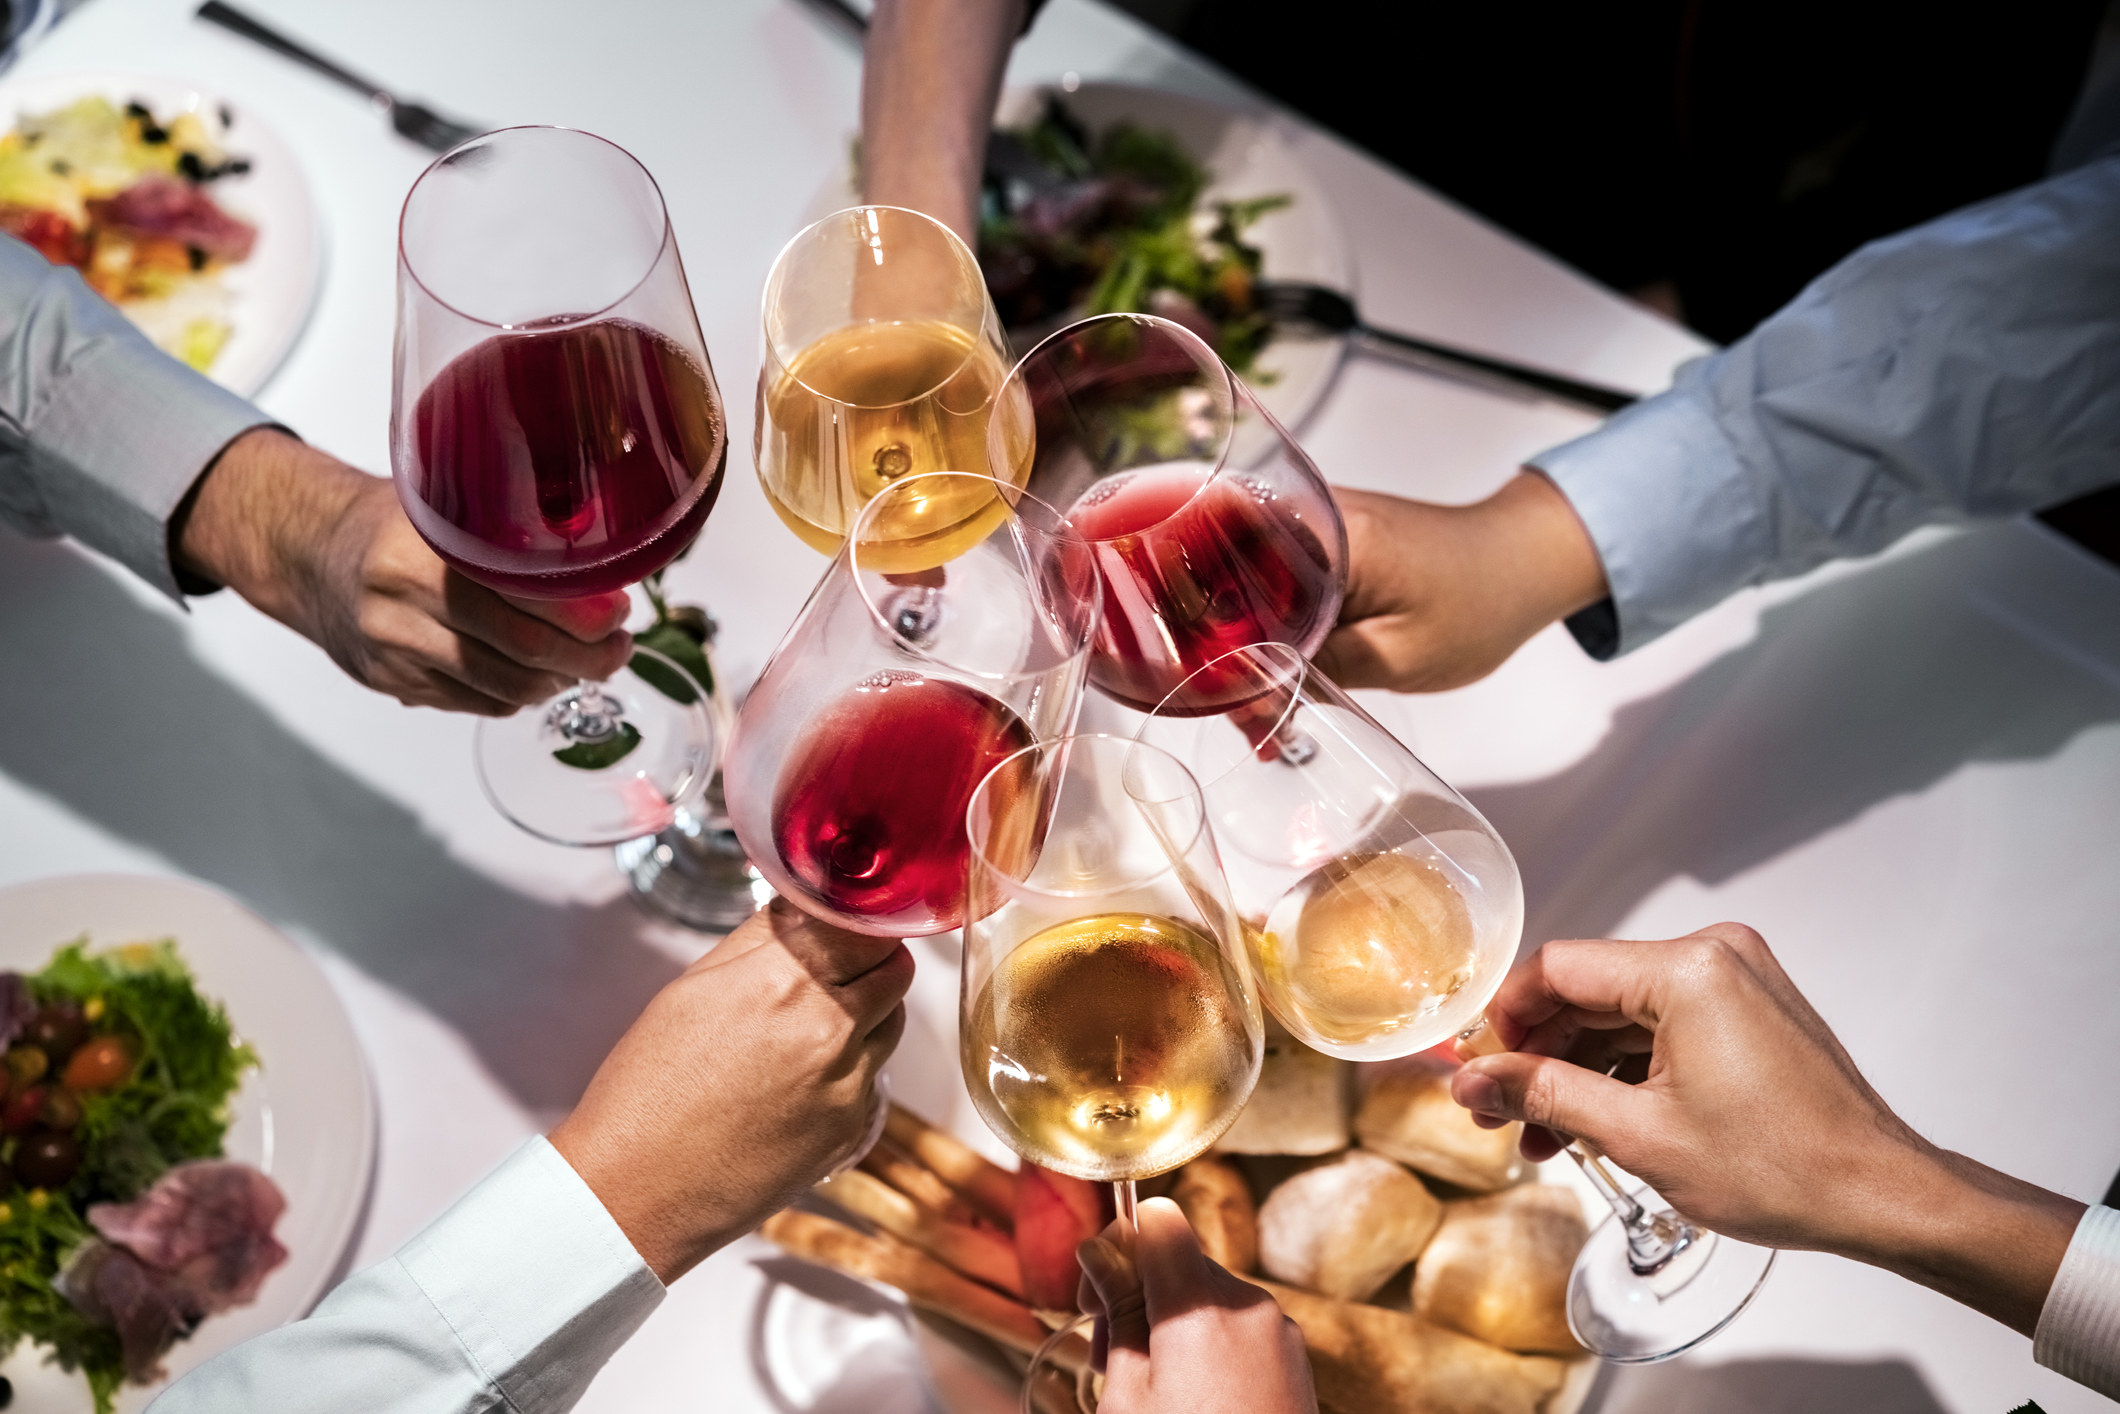 A group of people toasting with wine glasses.